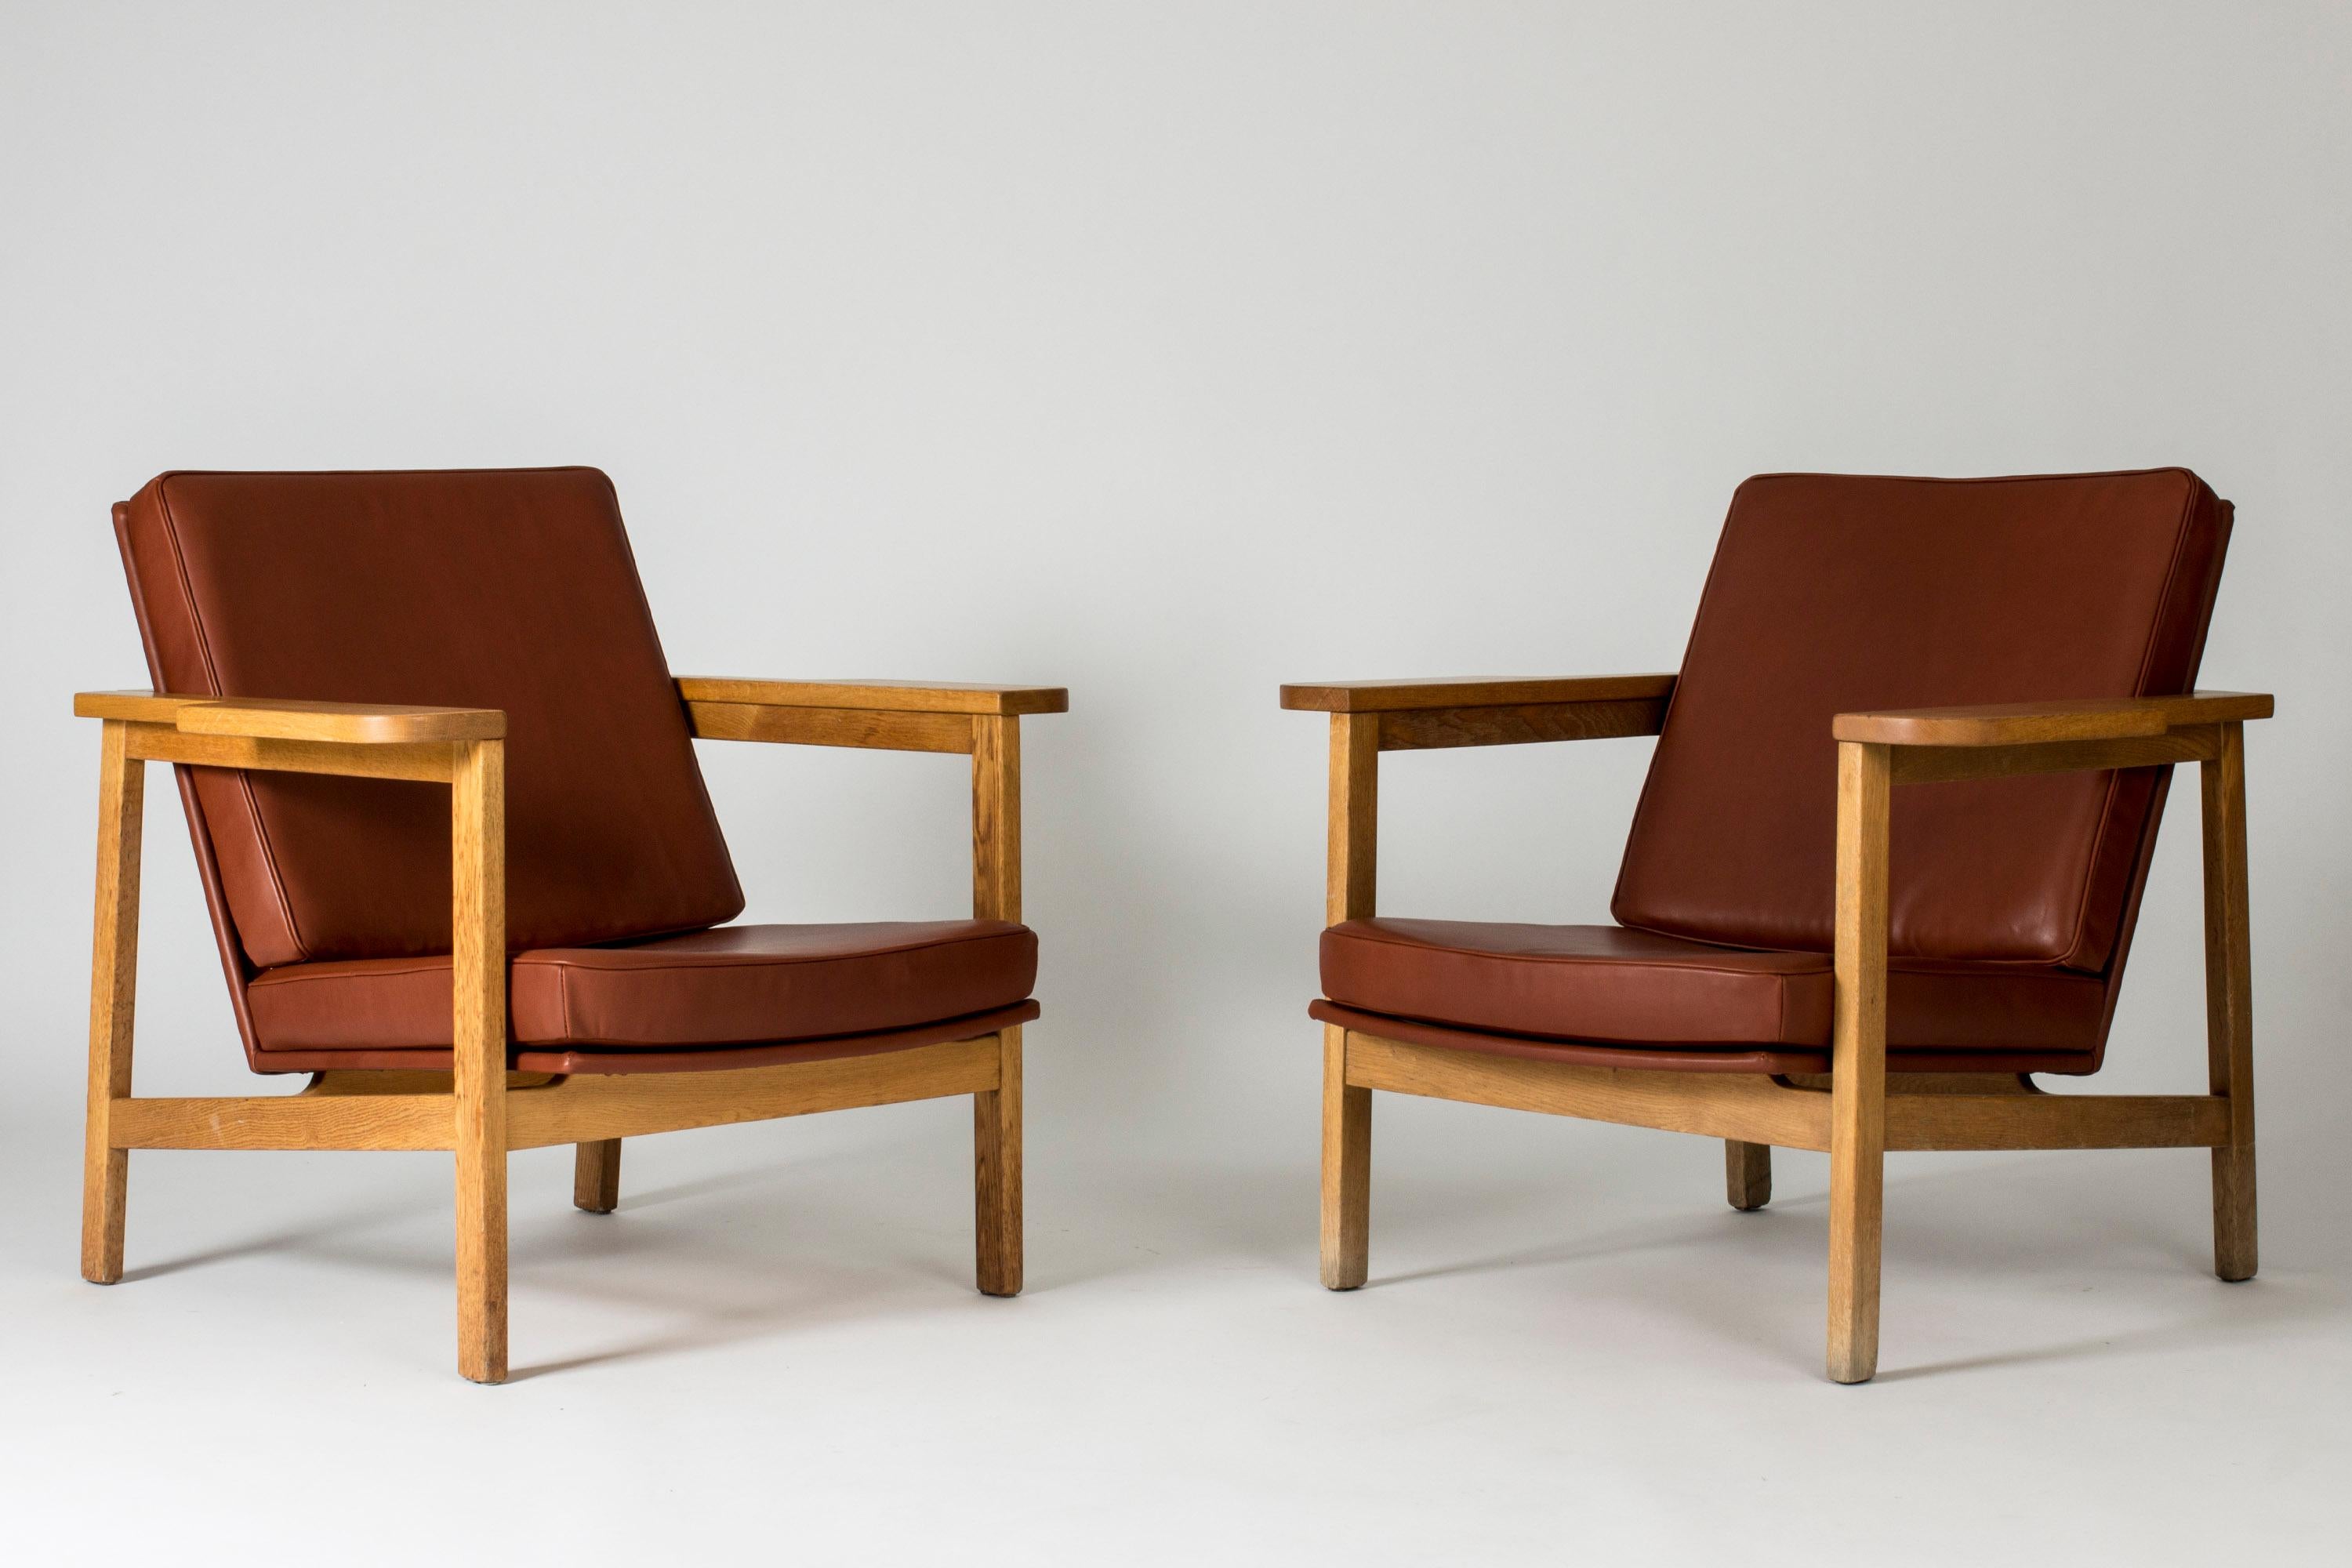 Scandinavian Modern Pair of Lounge Chairs by Carl-Axel Acking for Nordiska Kompaniet, Sweden, 1950s For Sale